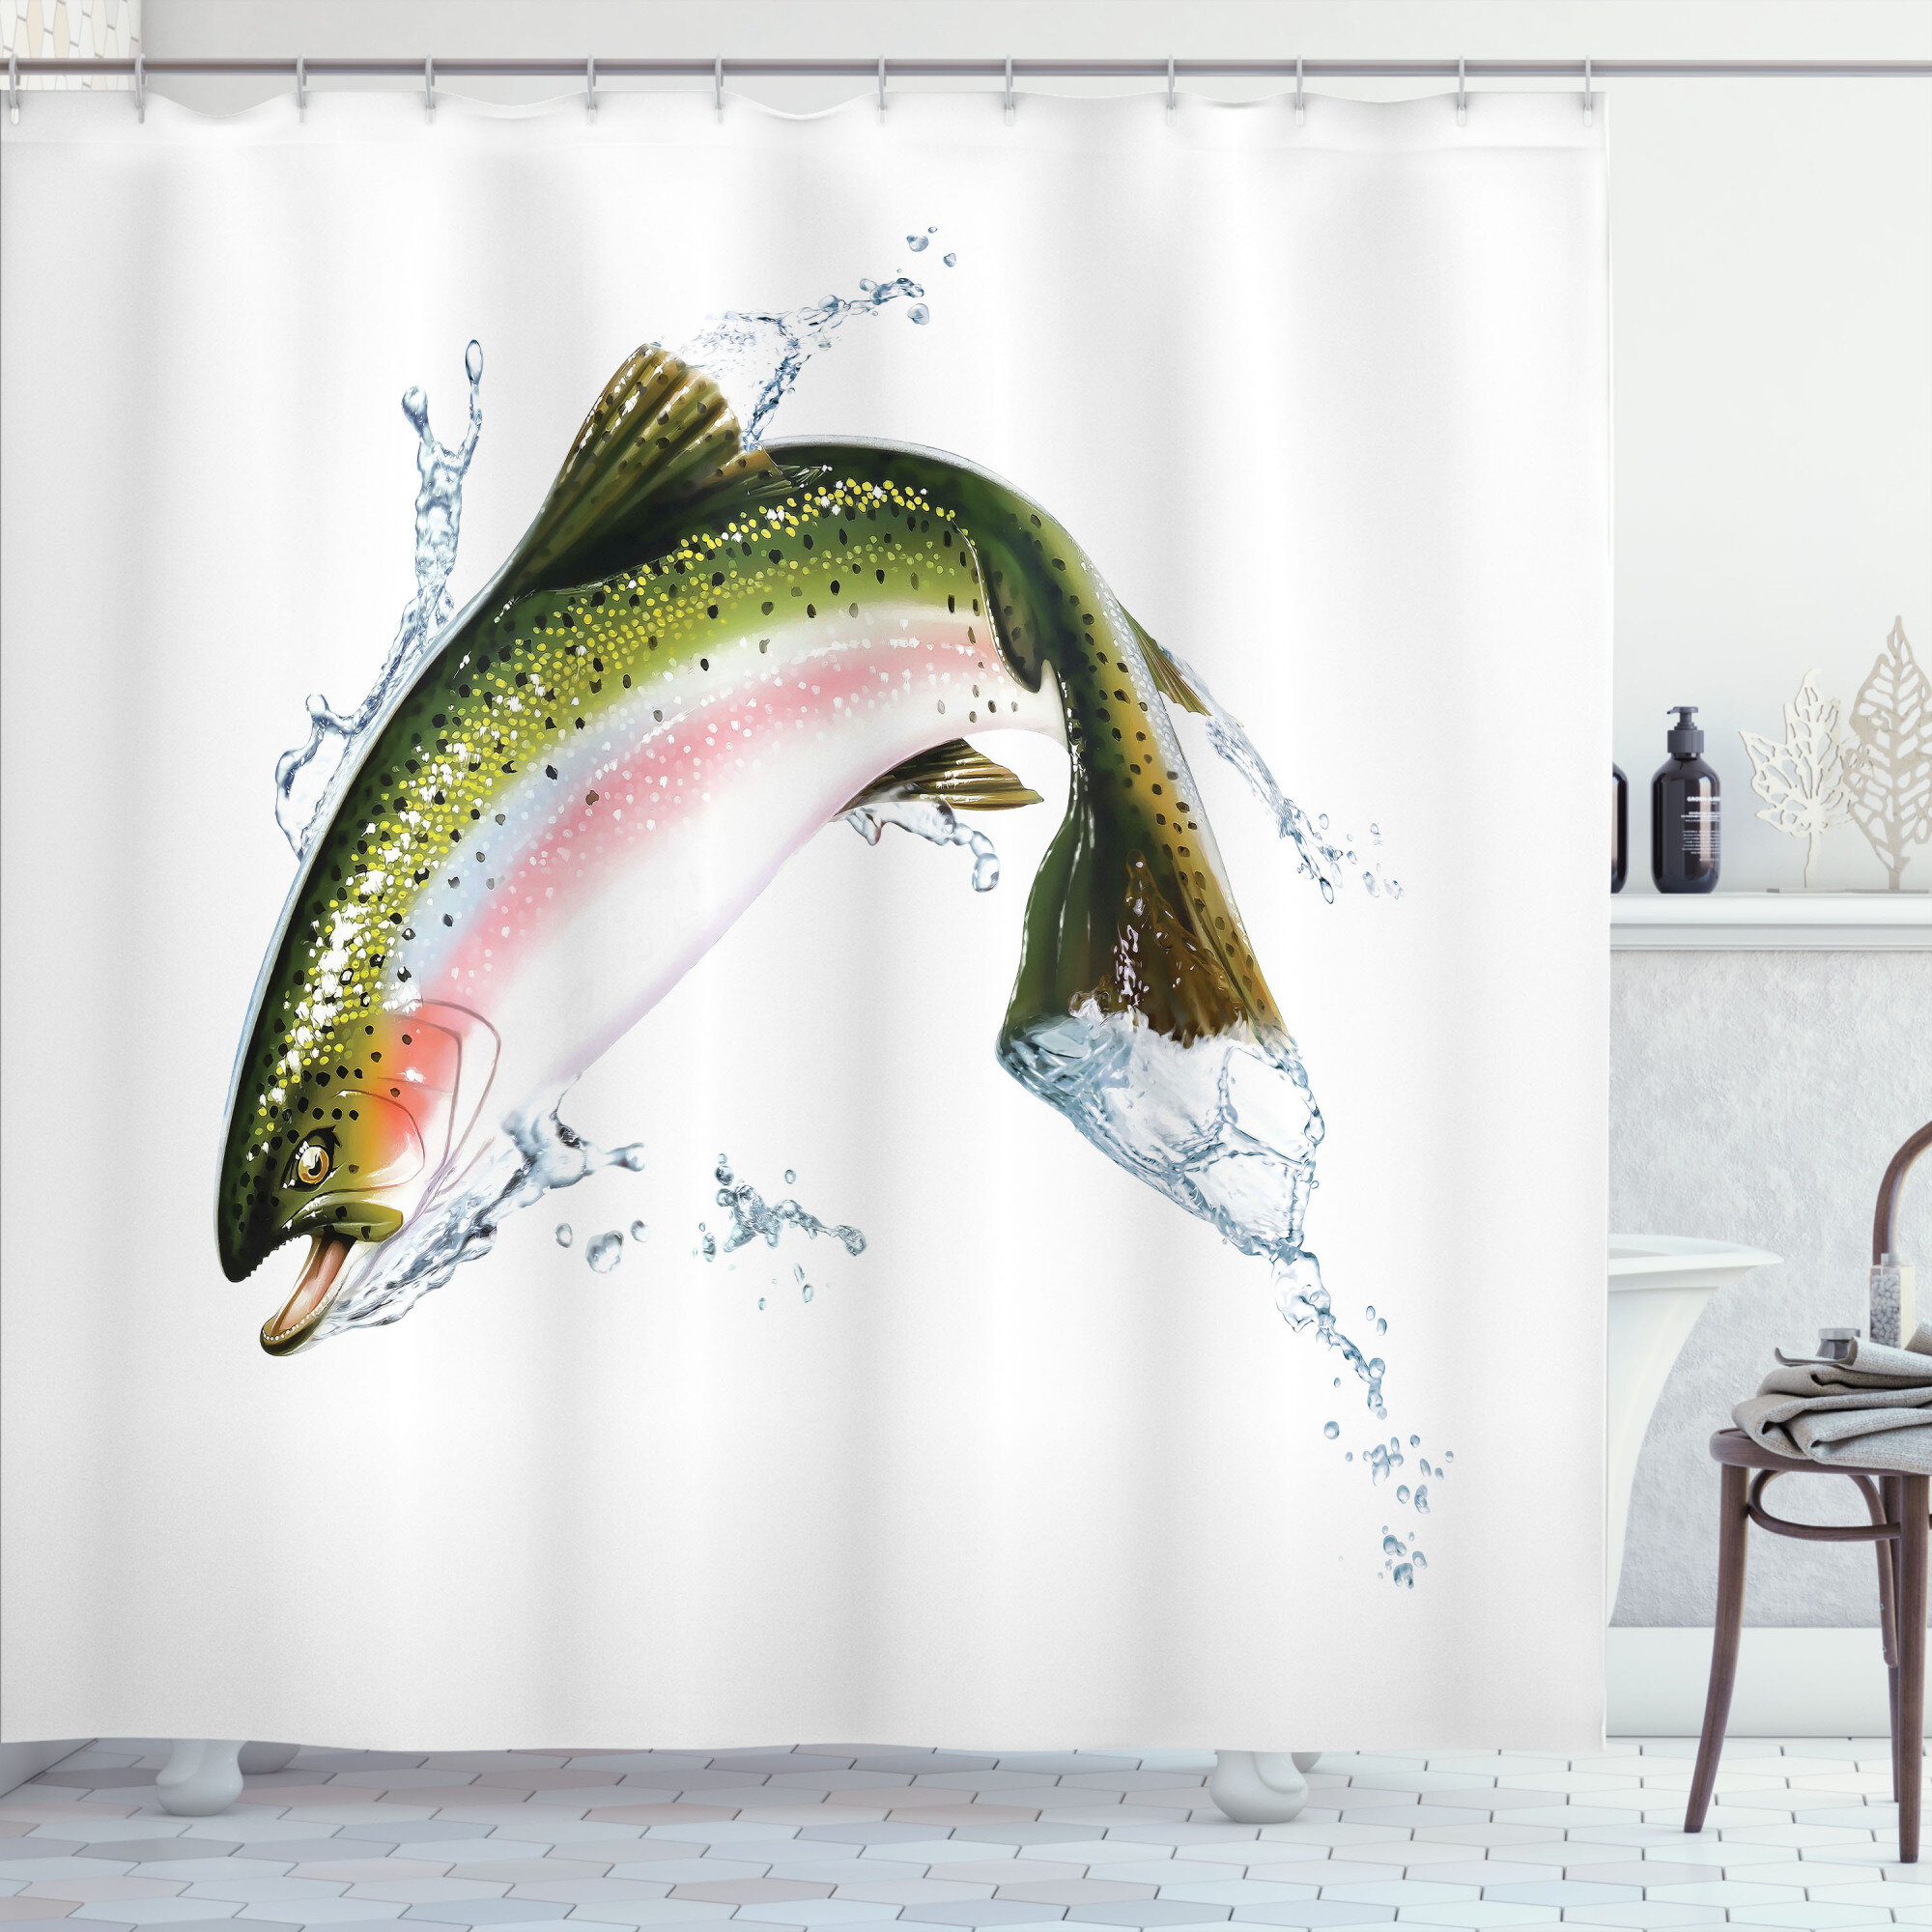 Fish Shower Curtain Set + Hooks East Urban Home Size: 69 H x 105 W